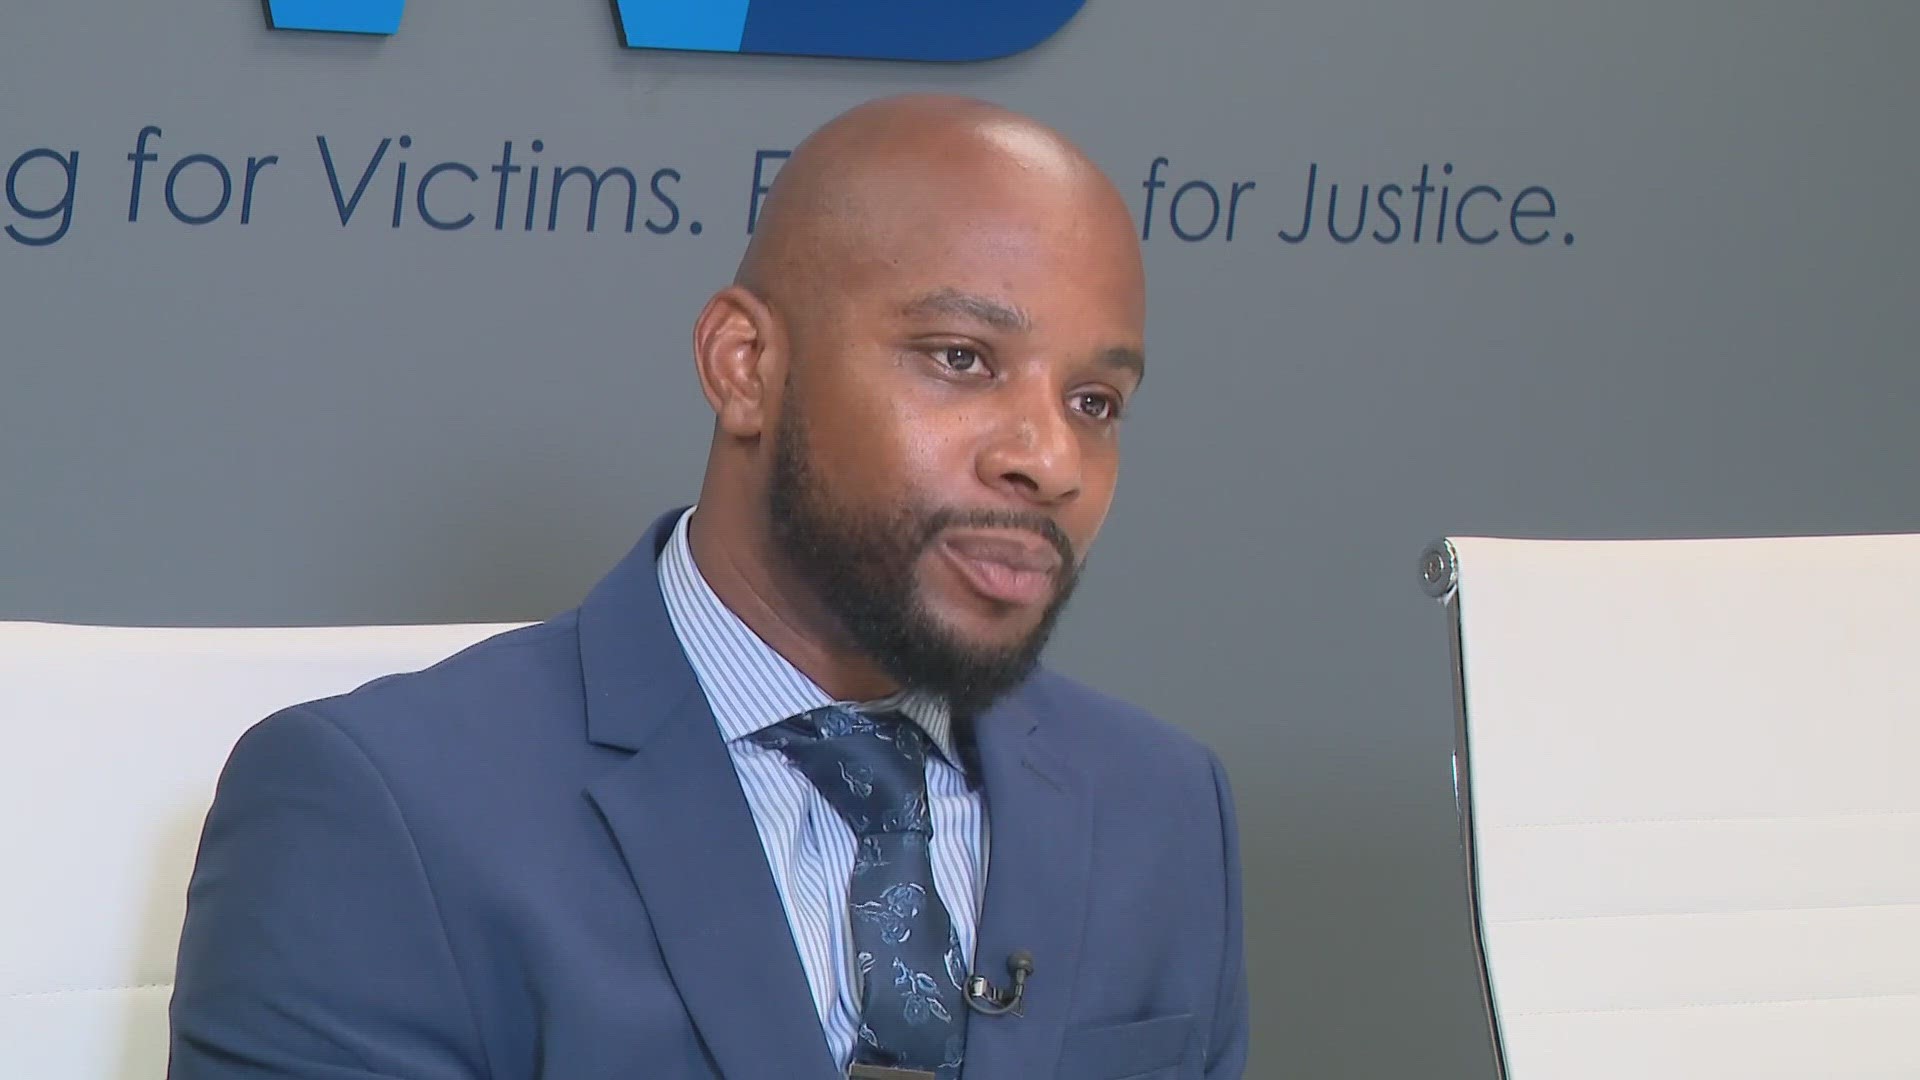 “What we want, as Black people in this country, in this city especially, is to feel safe, you know, the same for anybody else," said attorney Sean Walton.